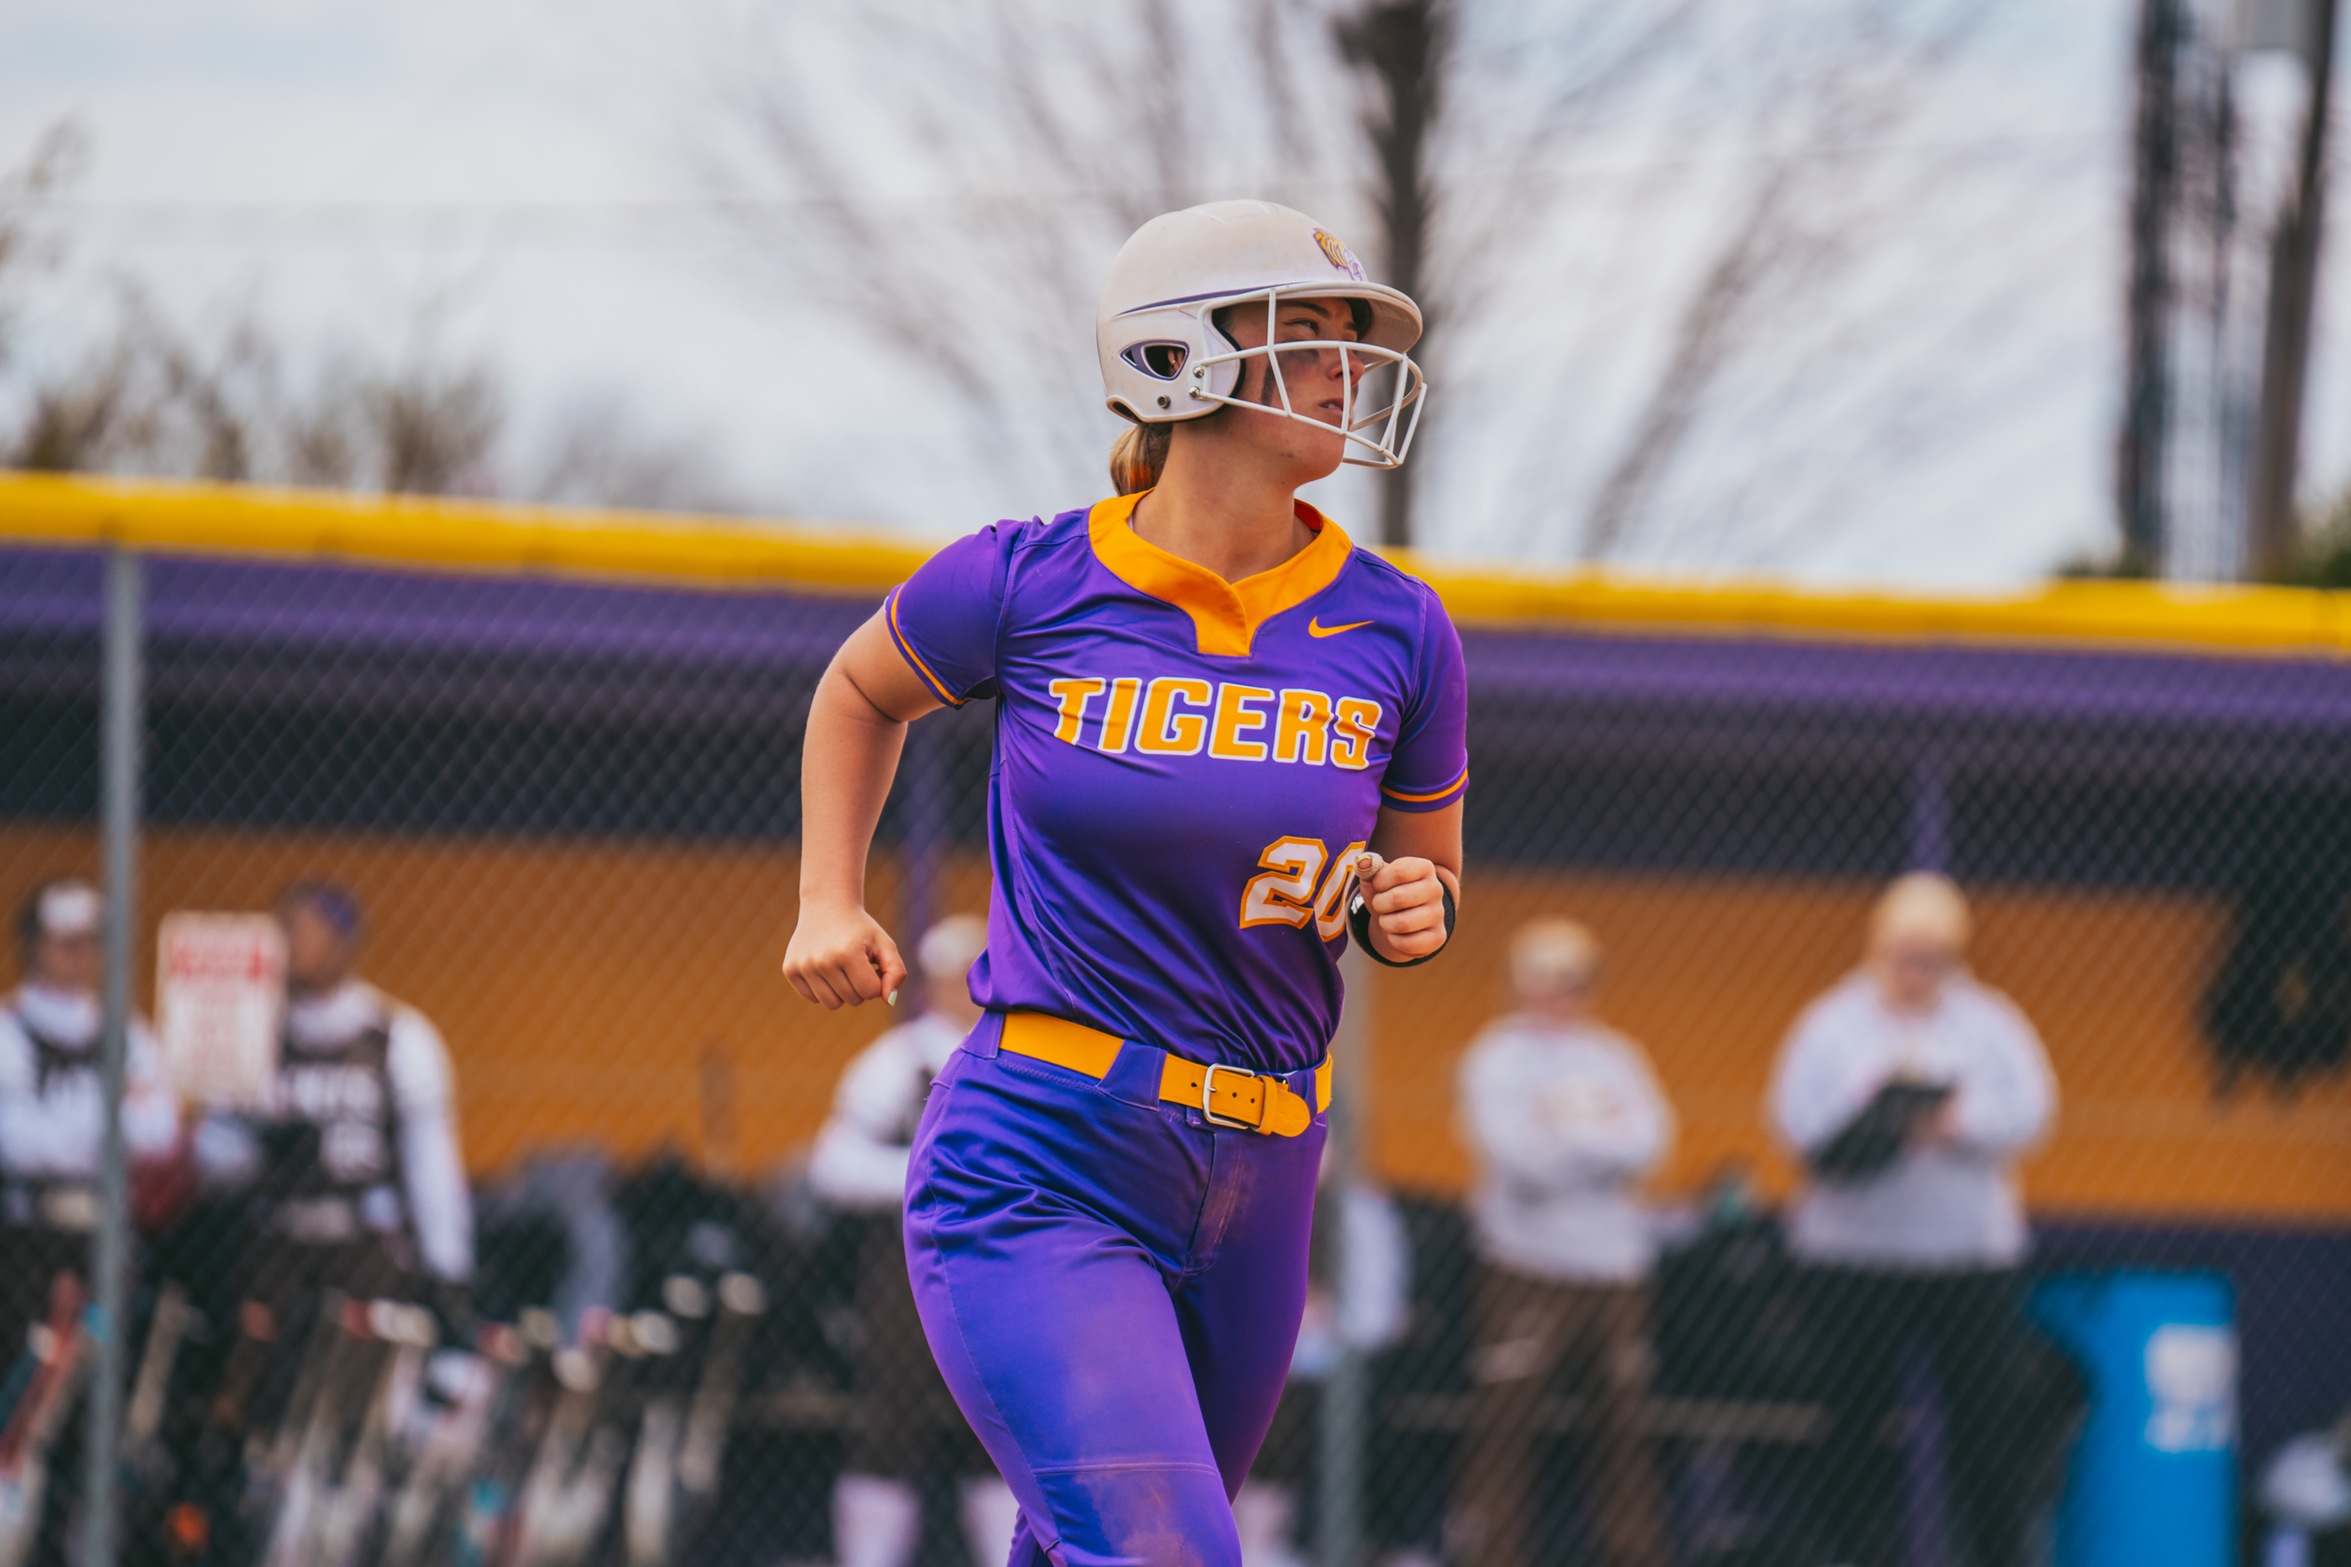 ONU TAKES SPLIT ON SECOND DAY OF CCAC SOFTBALL TOURNAMENT